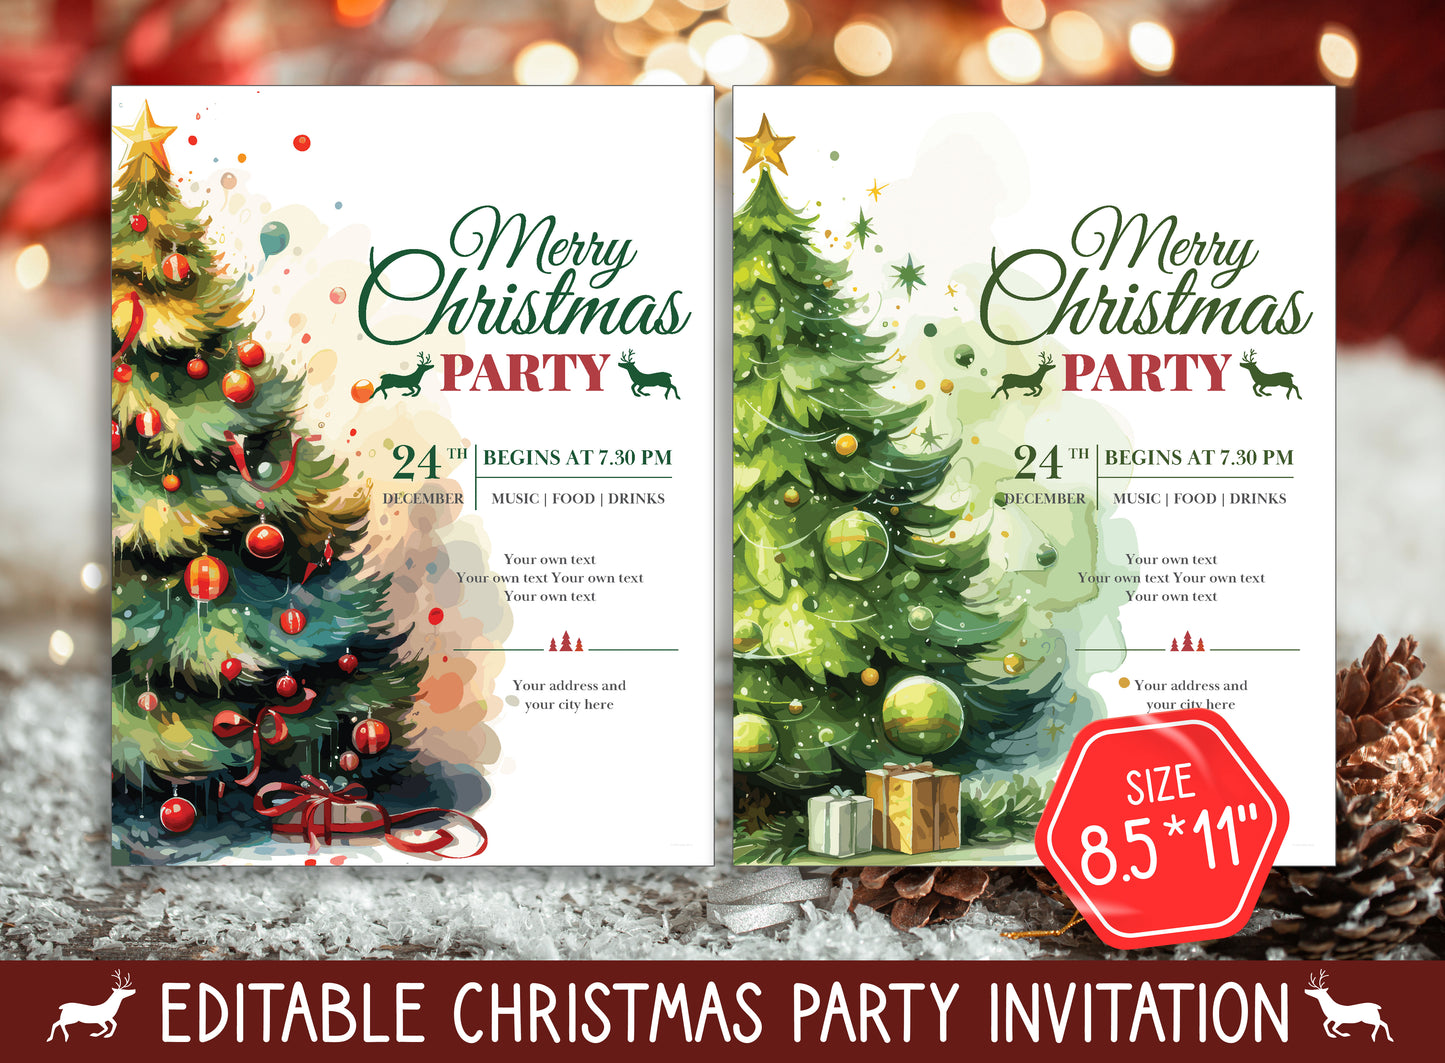 Editable Invitations Christmas Party, Choose from 2 Designs & 2 Sizes (8.5"x11" and 5"x7"), PDF File, Instant Download